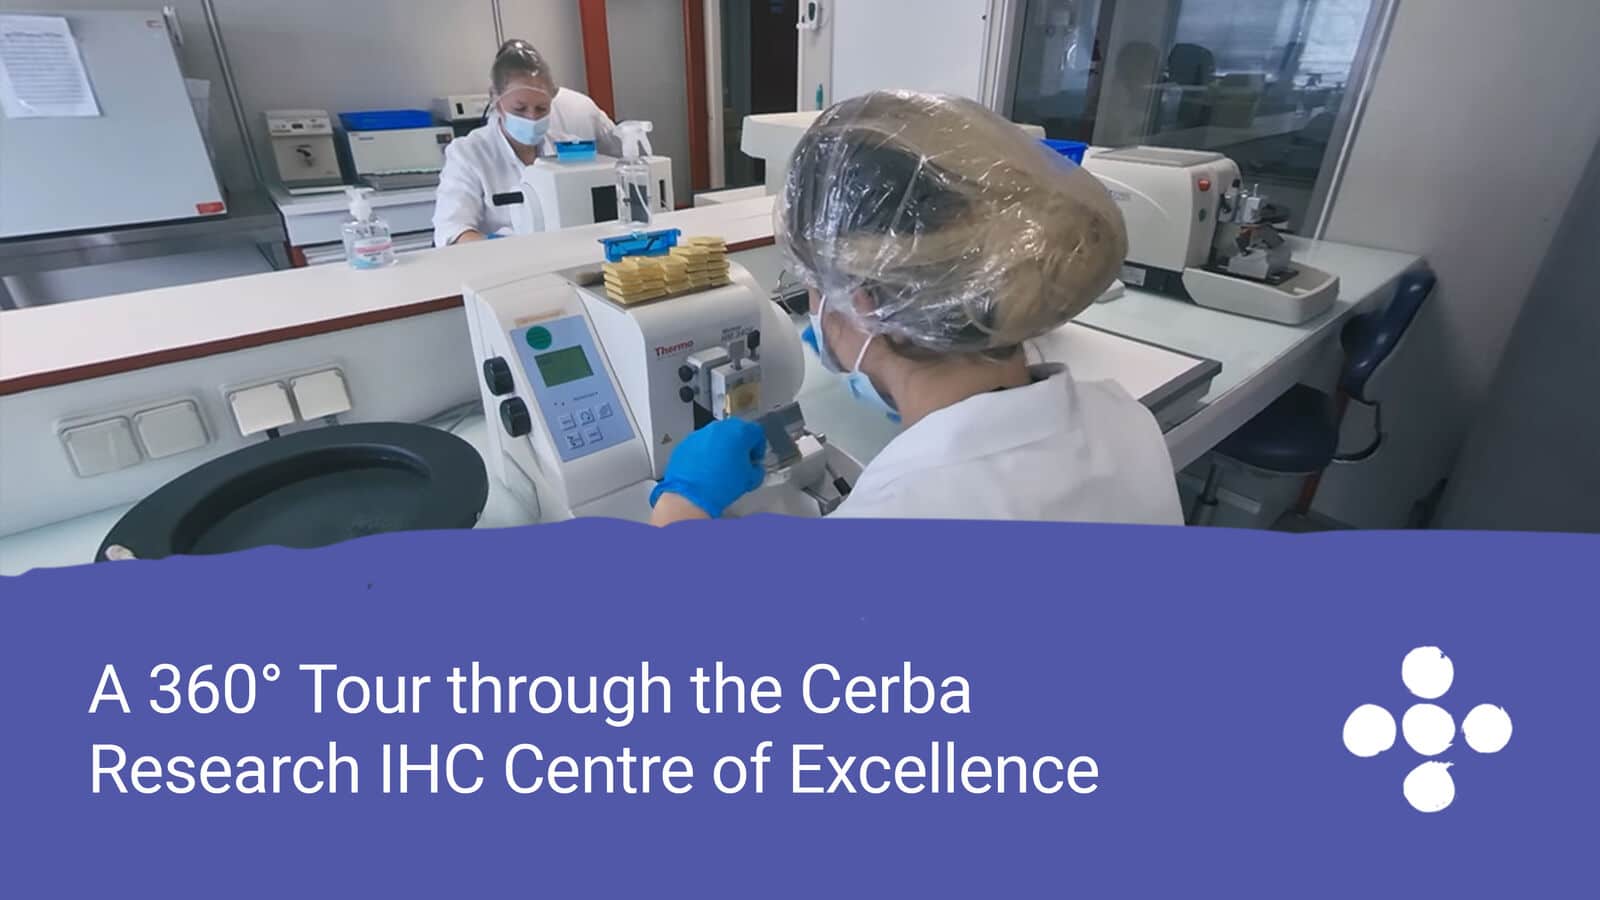 Cerba Research takes you on a 360 degree tour of their IHC Centre of Excellence lab